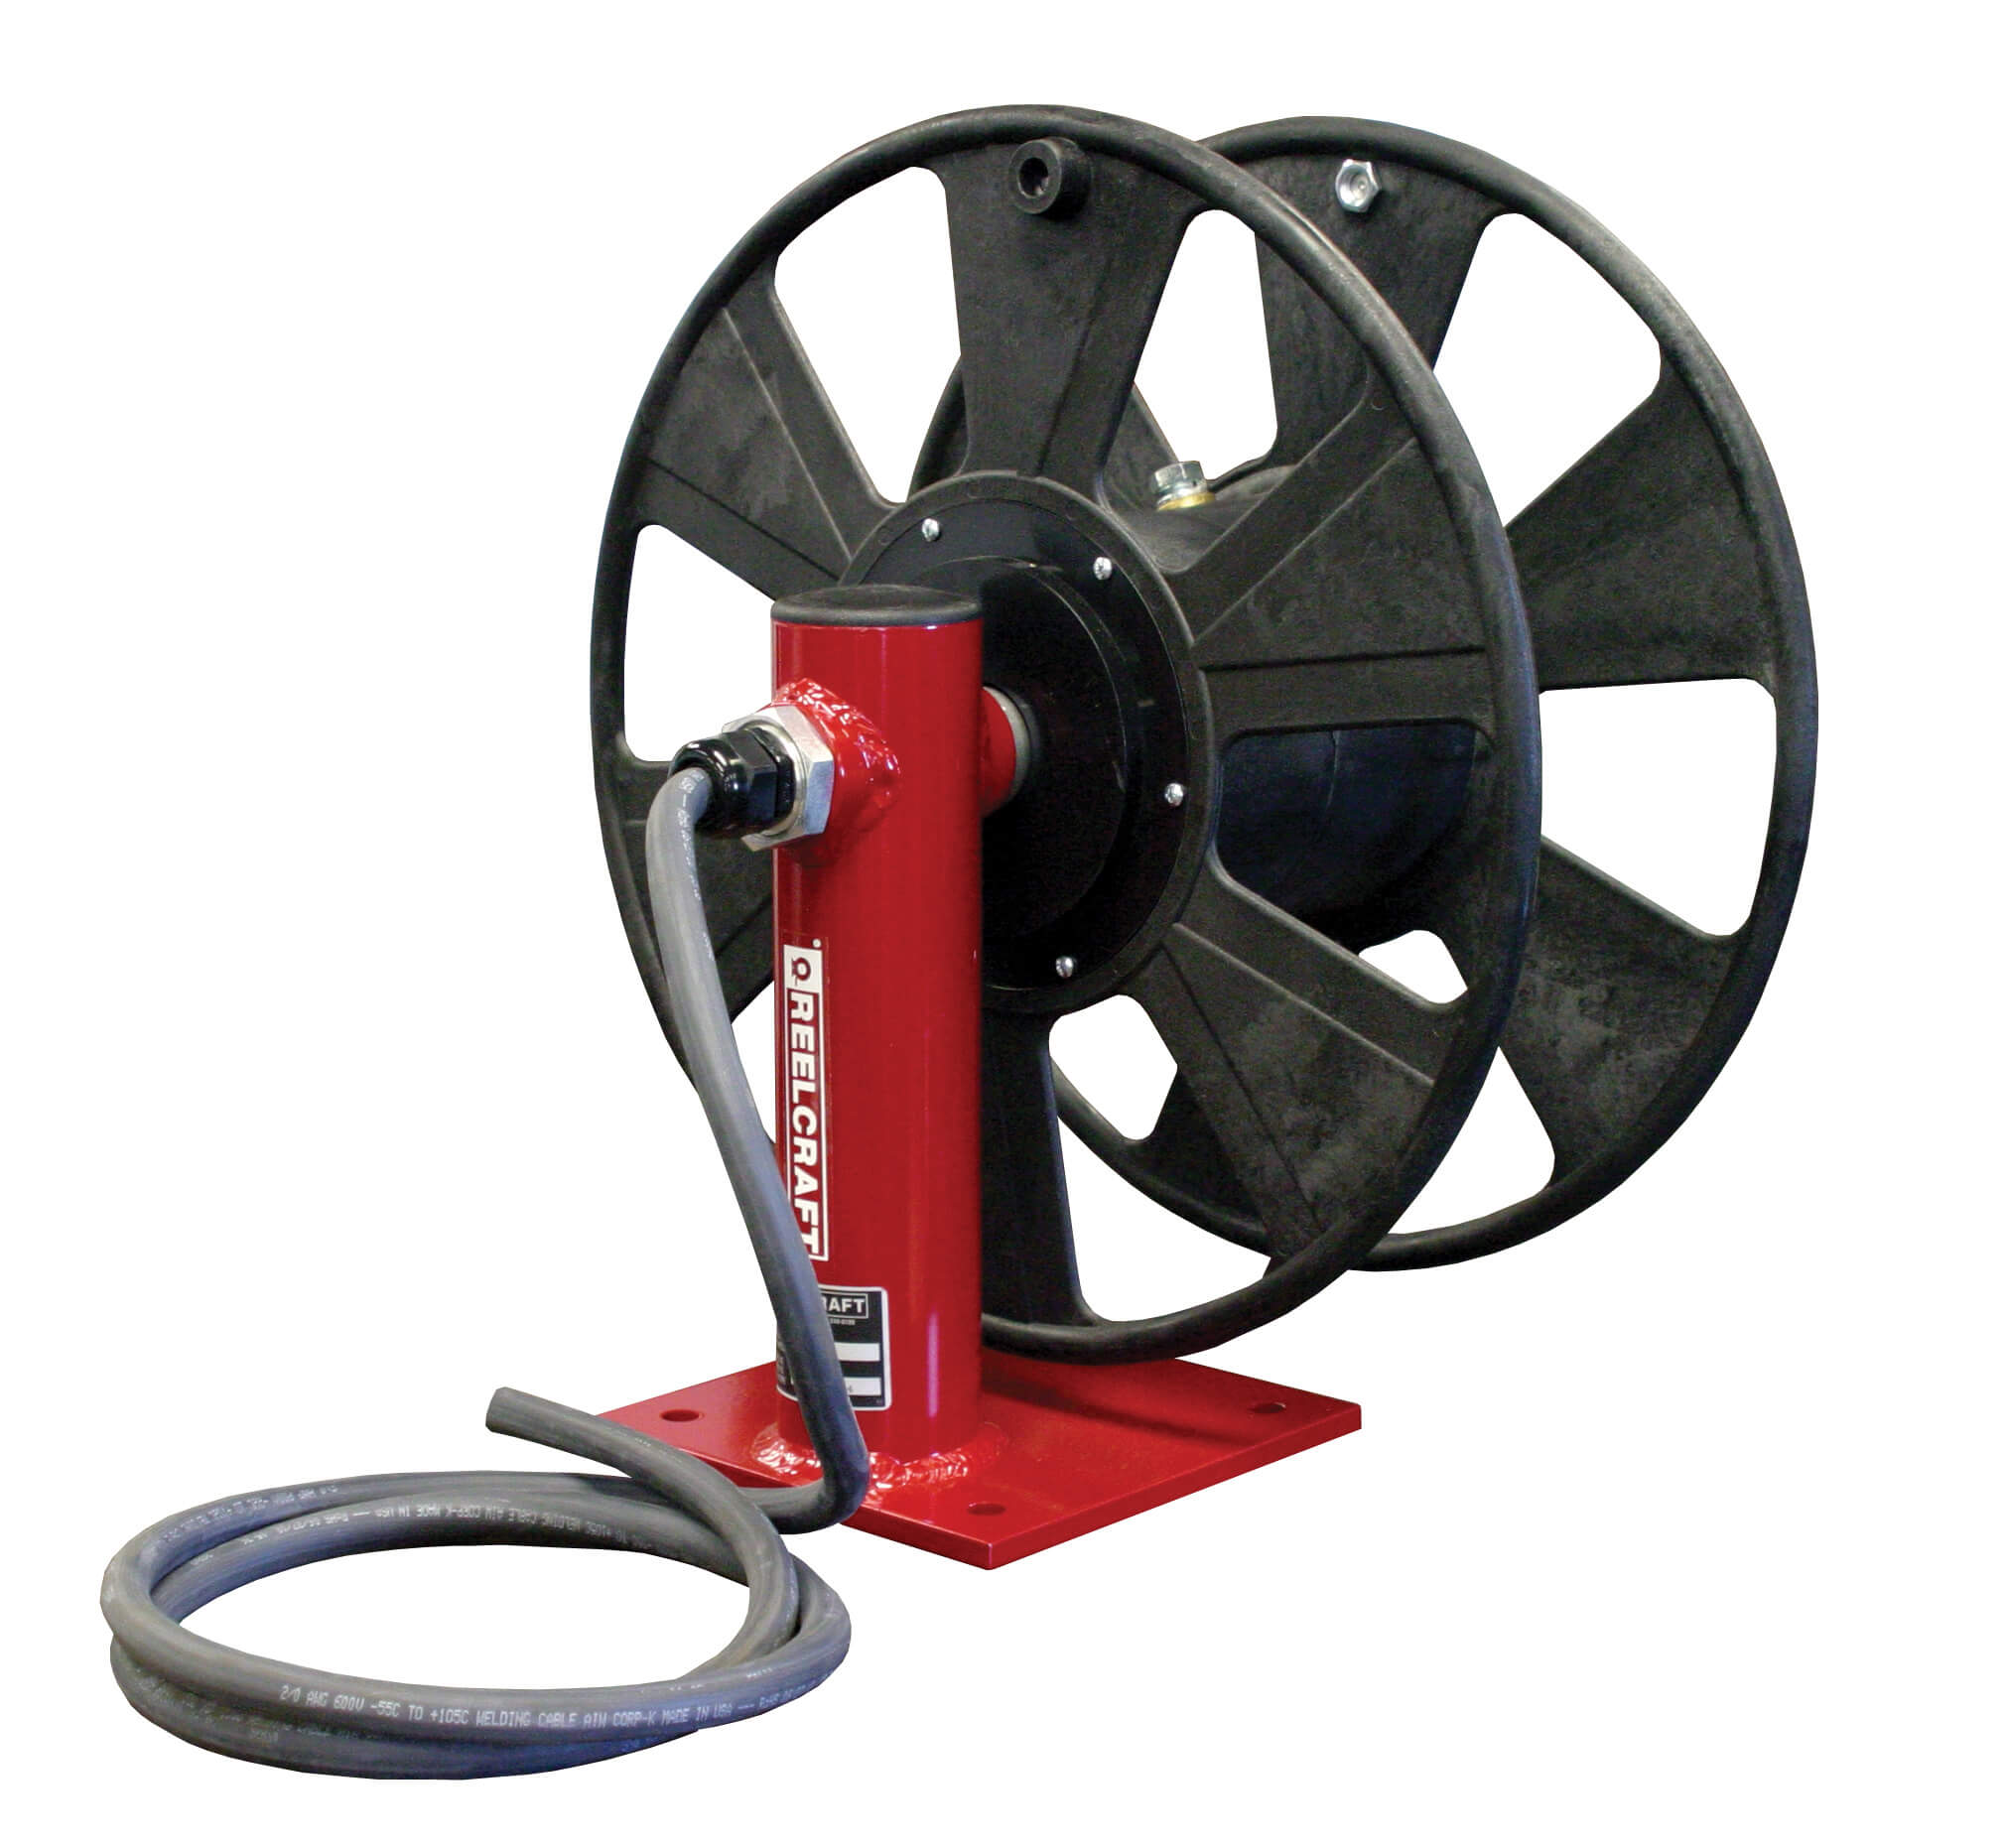 Reelcraft T-1460-0 Hand Crank Welding Reel, 300A, Cable Size 150